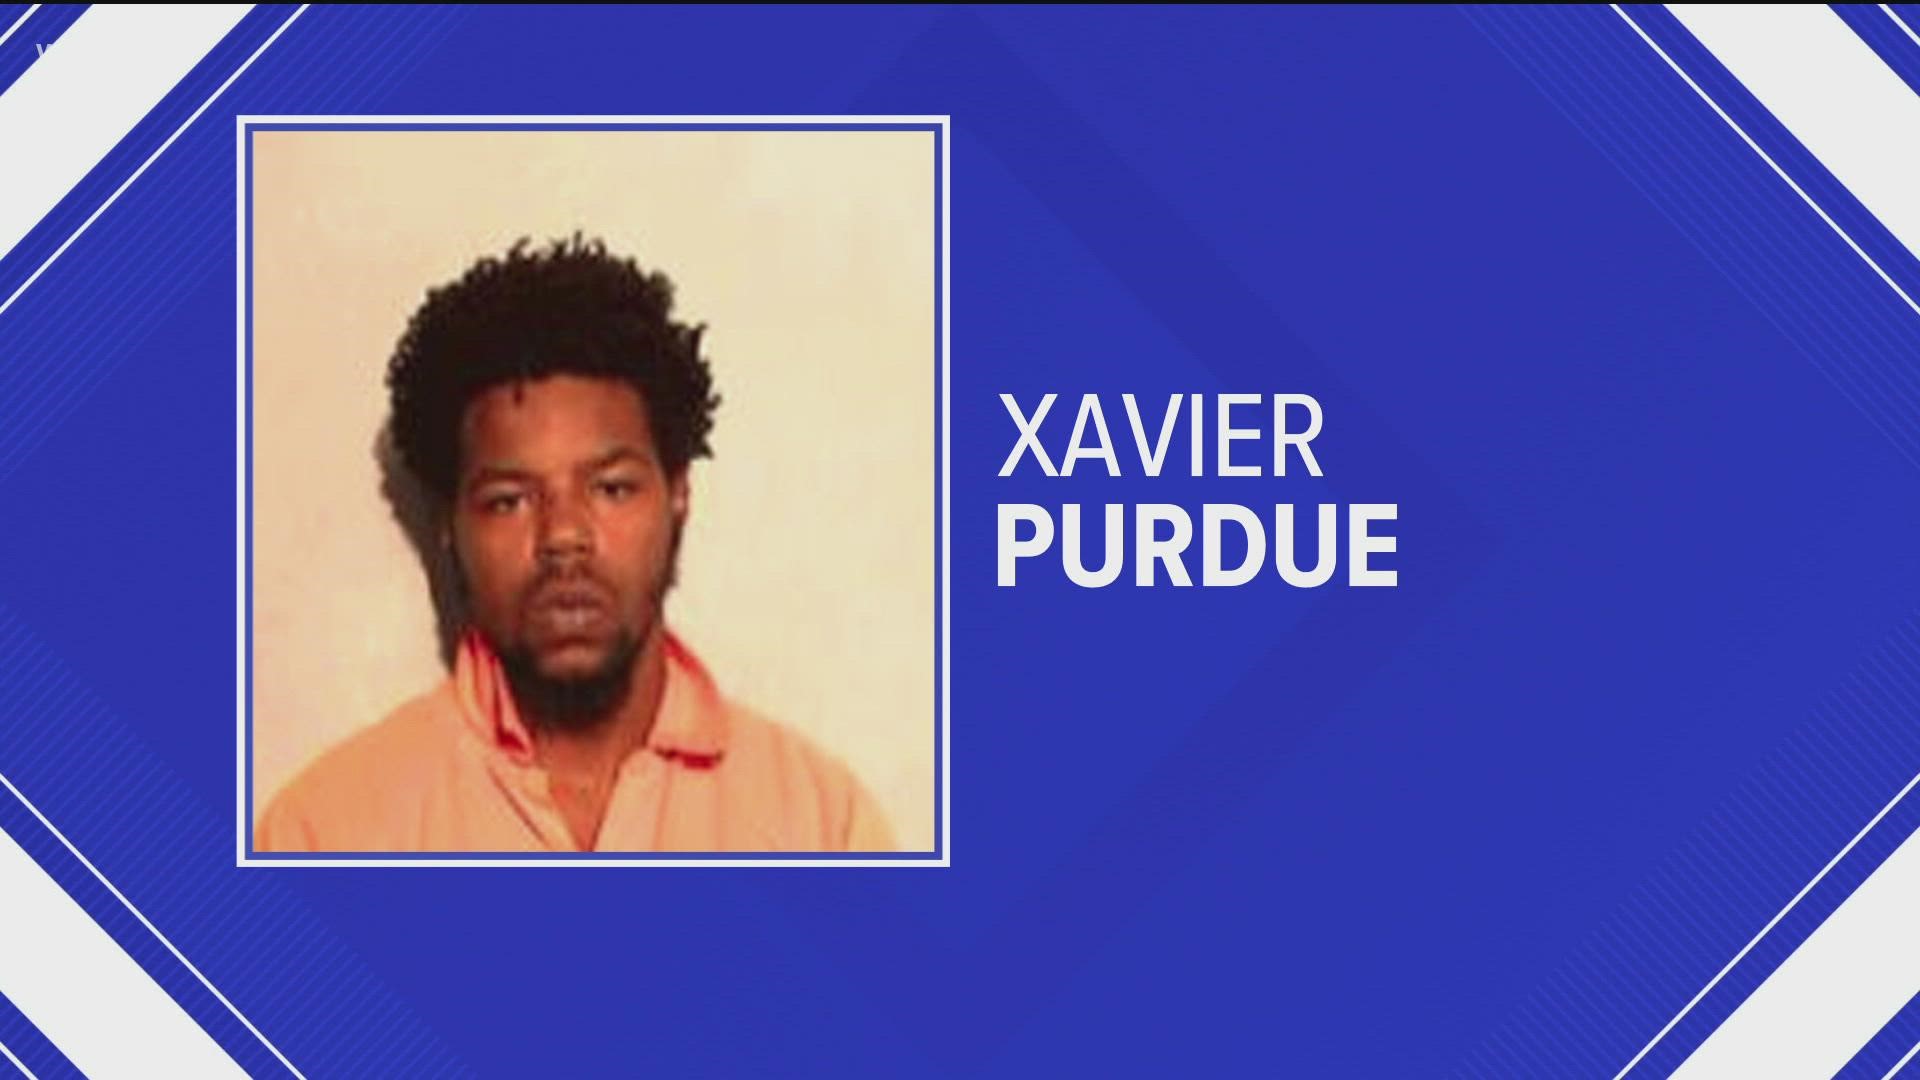 Nicholas Deluca, 21, was shot while leaving a convenience store on Sept. 9, according to TPD. Xavier Purdue, 20, has been indicted on murder charges.